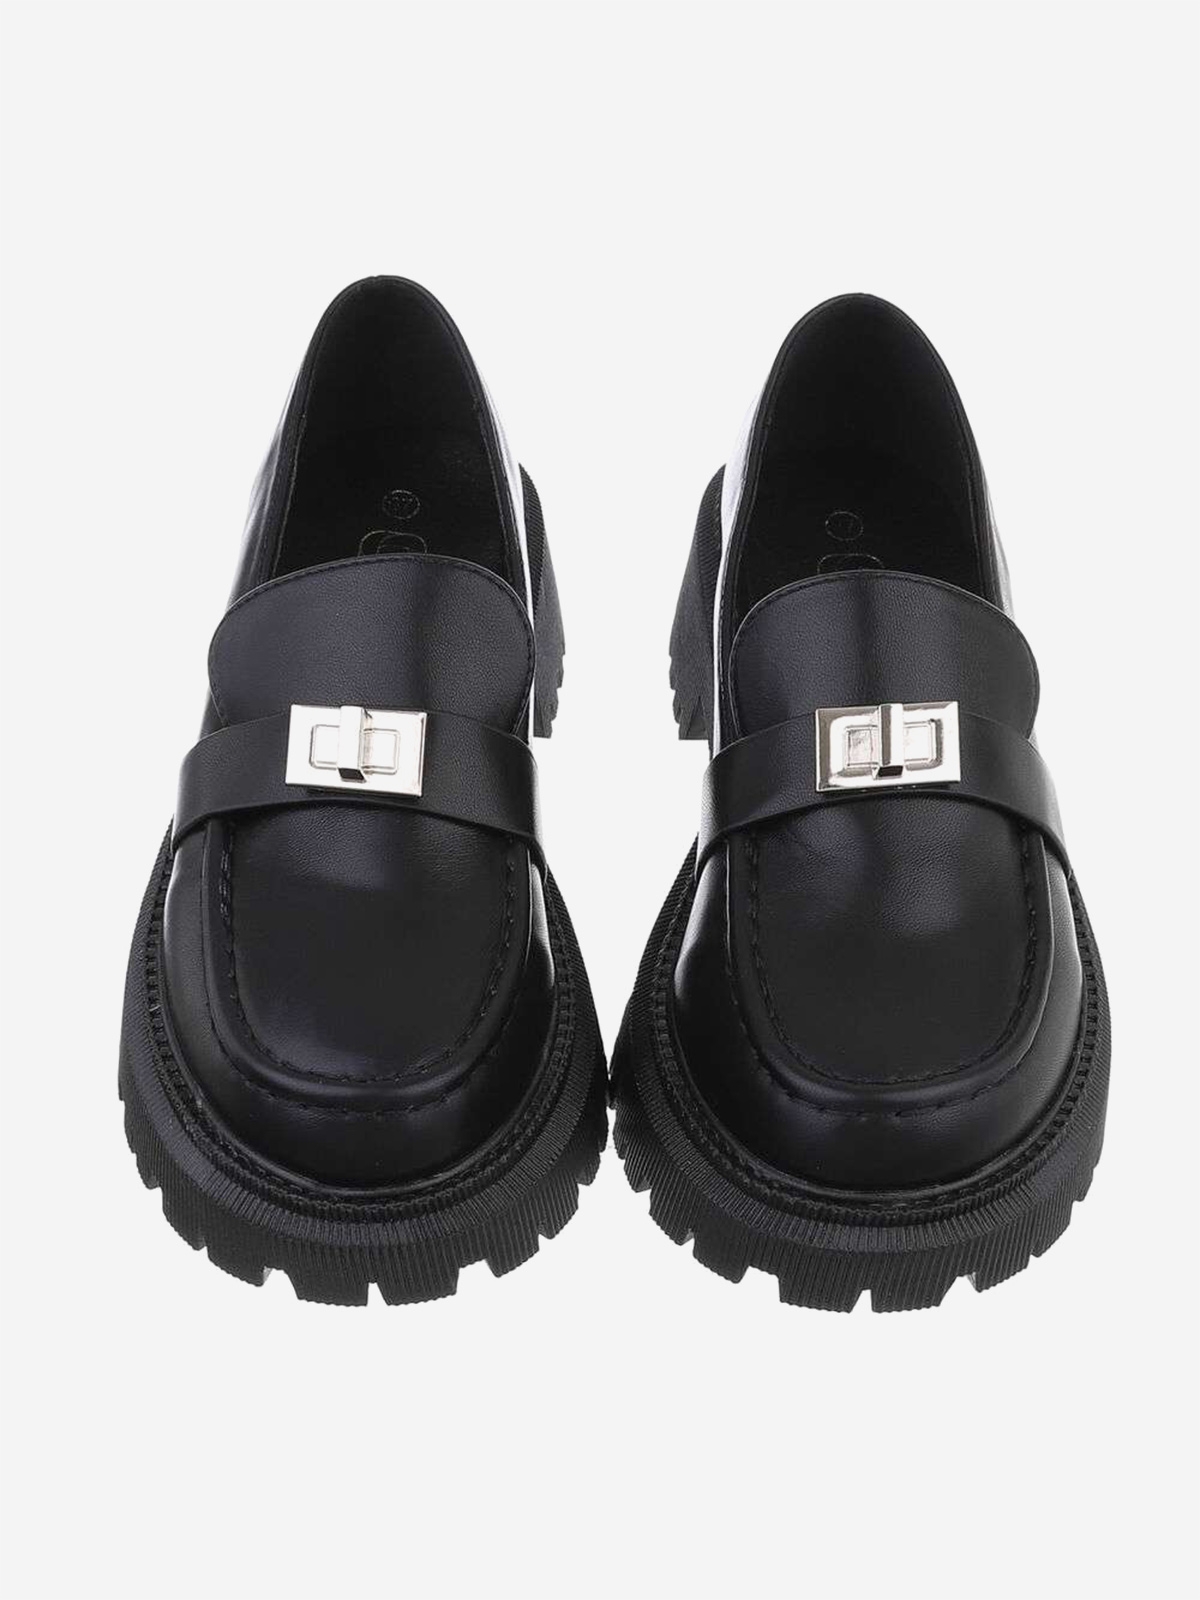 Women's loafers in black with a decorative accent on the front